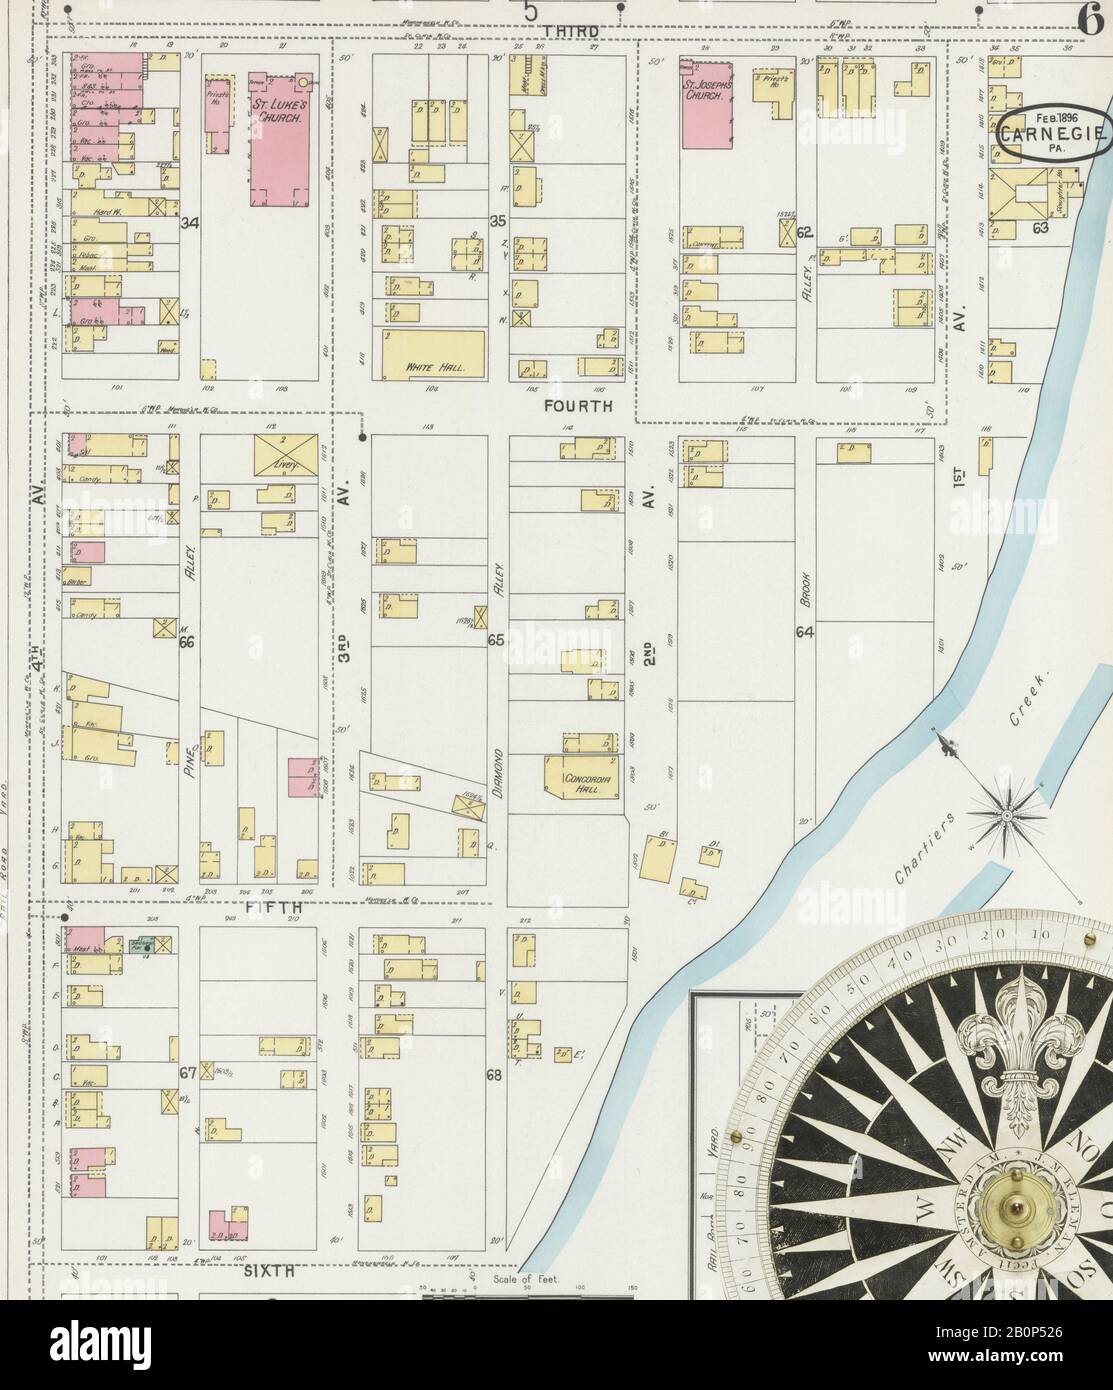 Image 6 of Sanborn Fire Insurance Map from Carnegie, Allegheny County, Pennsylvania. Feb 1896. 6 Sheet(s), America, street map with a Nineteenth Century compass Stock Photo